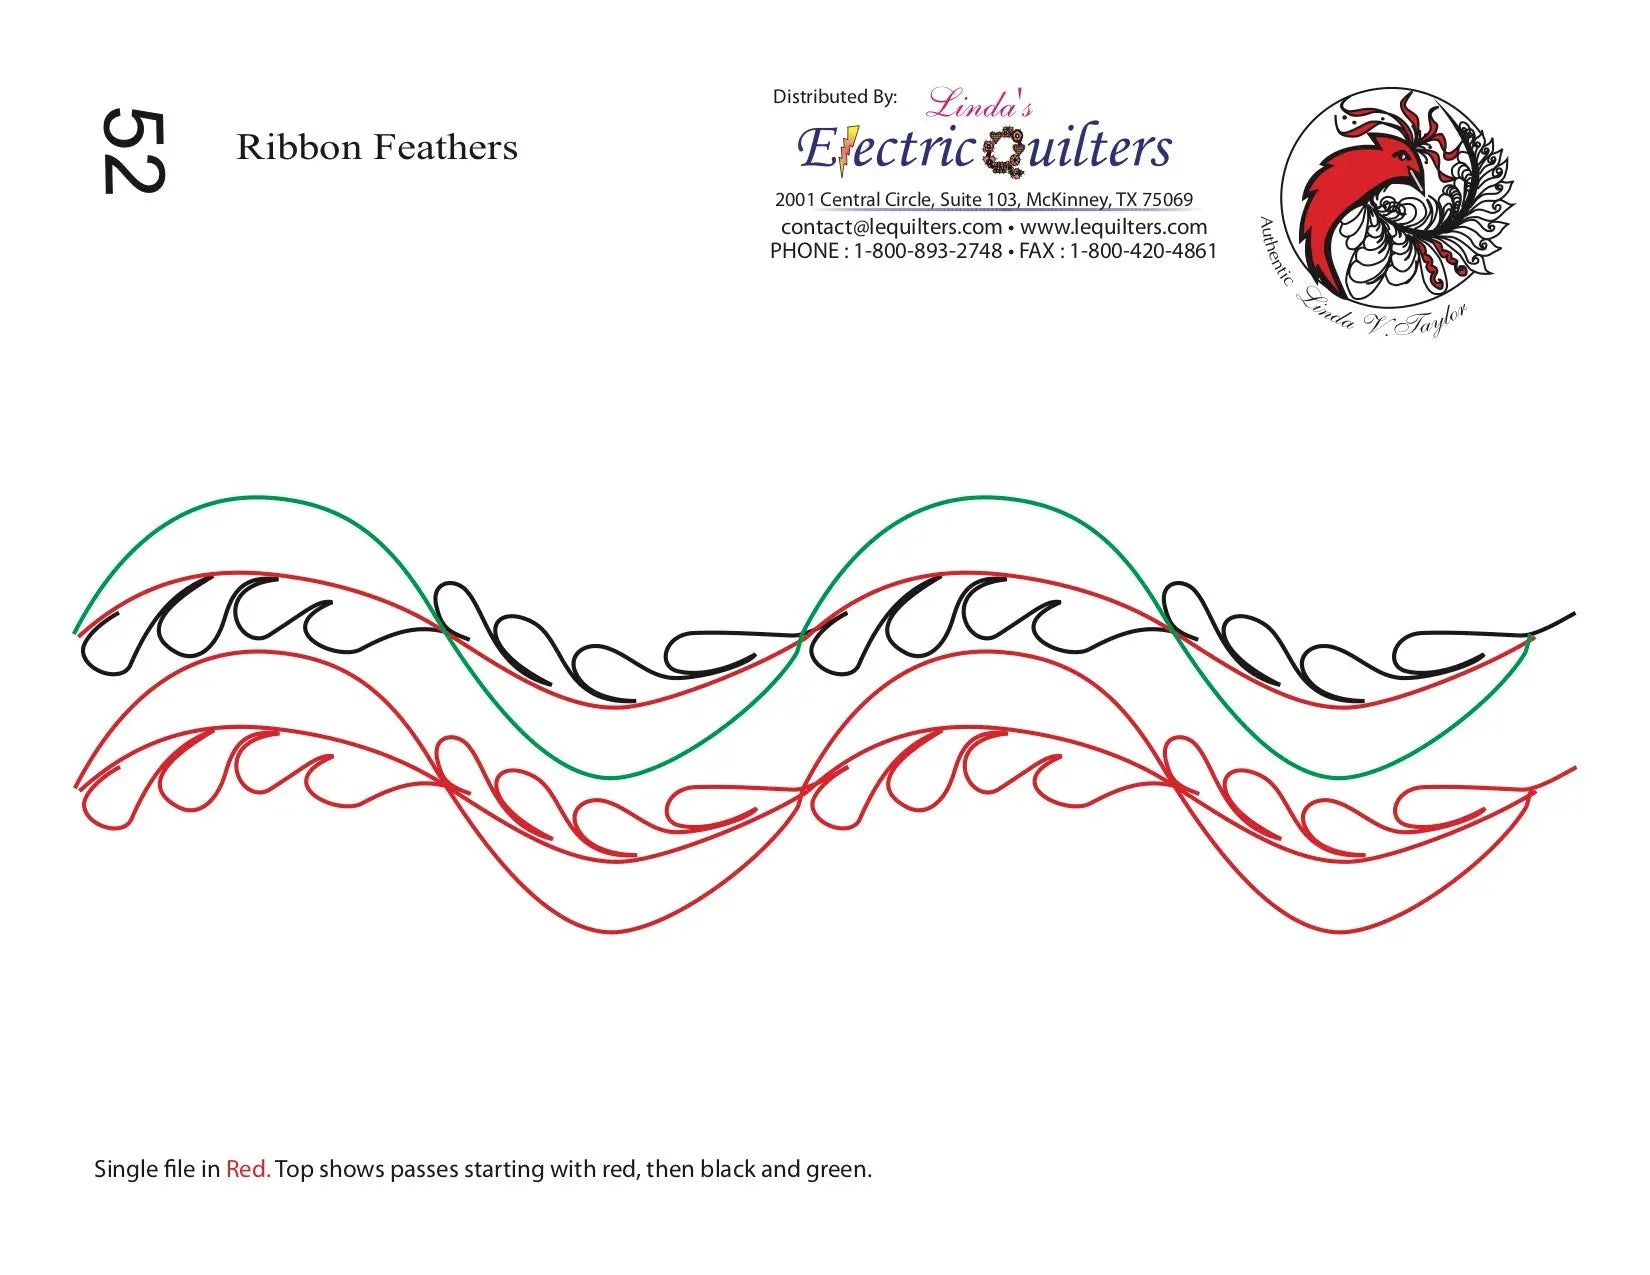 052 Ribbon Feather Pantograph by Linda V. Taylor - Linda's Electric Quilters